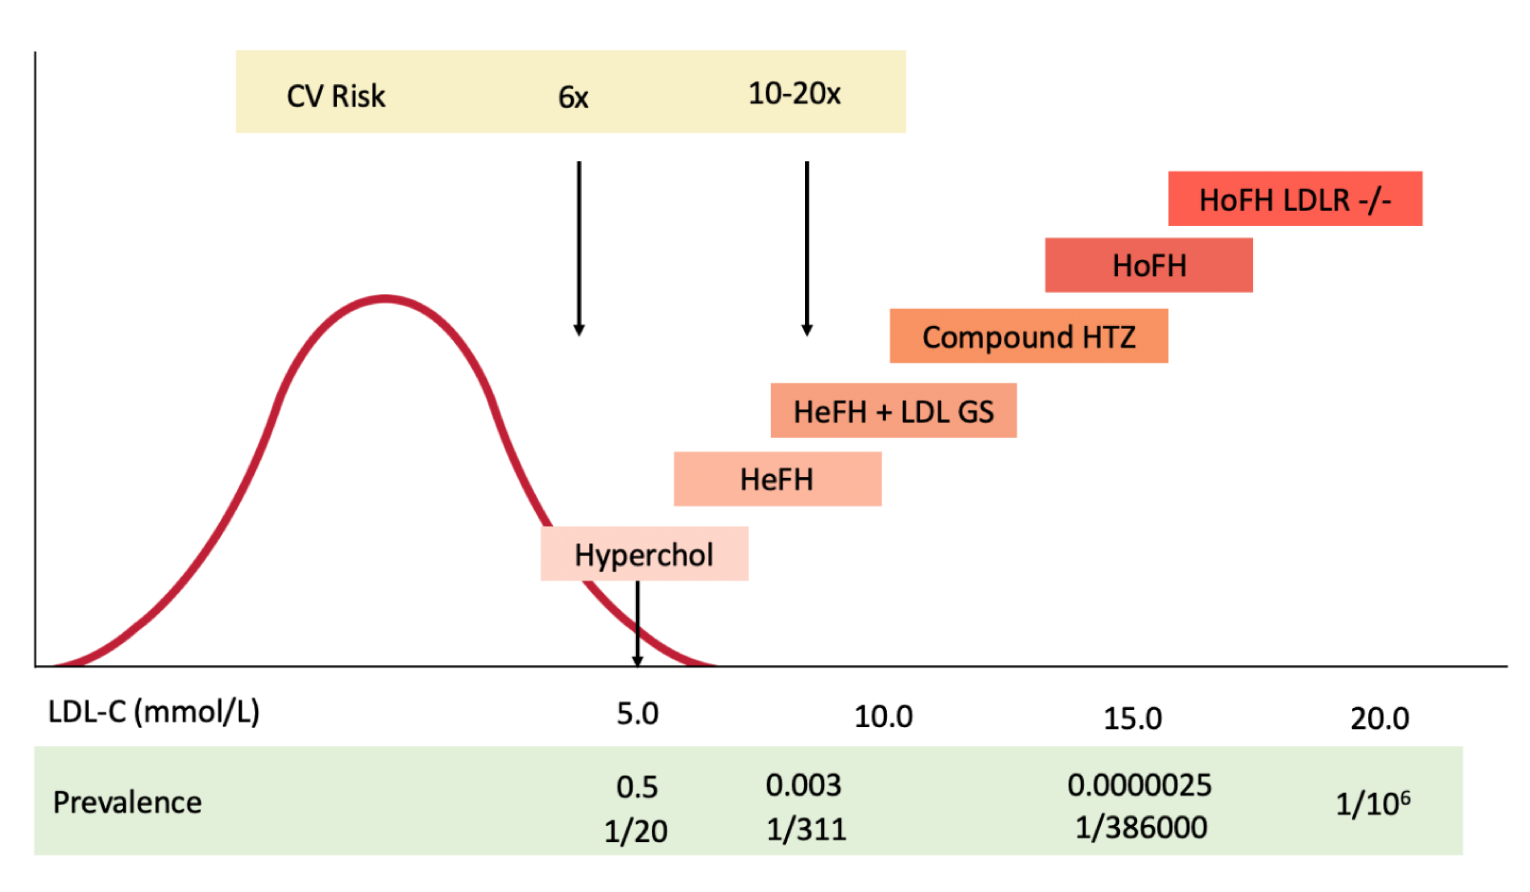 Figure 1 presents the LDL-C range and theoretical cardiovascular risk associated with different forms of hypercholesterolemia. It demonstates that from severe hypercholesterolemia to HoFH with null variant(s) in the LDLR gene, the cardiovascular risk increases, but with considerable overlap between the various FH genotypes.